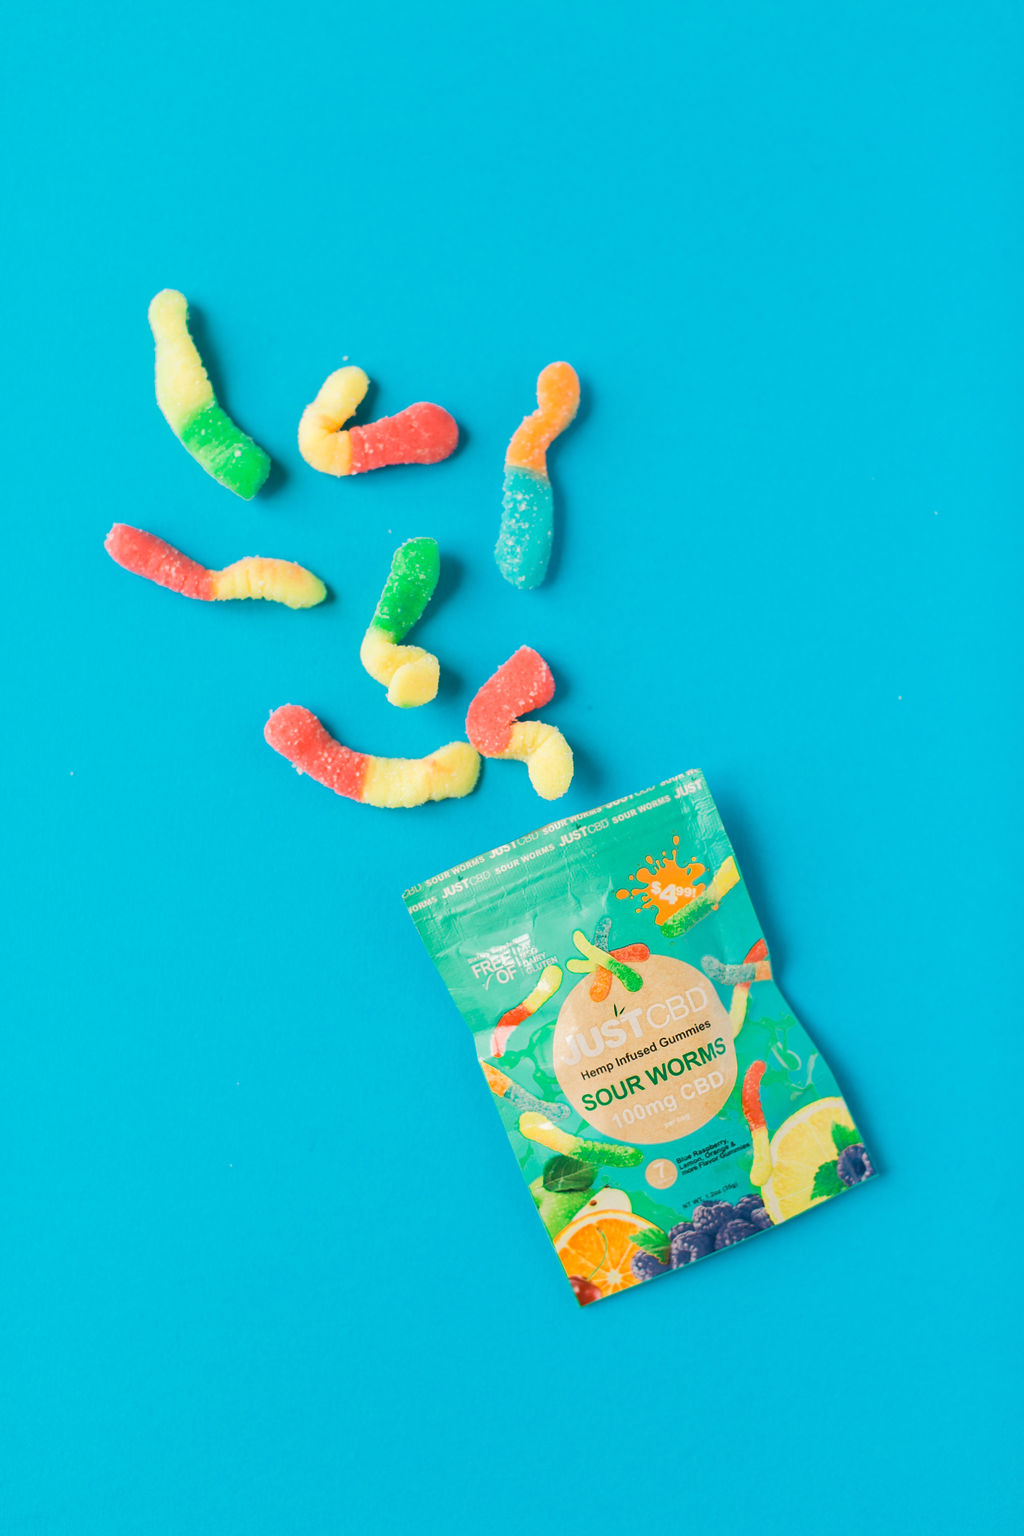 BEST CBD GUMMIES FOR 2022 RECOMMENDED BY DR. LAURA GEIGAITE